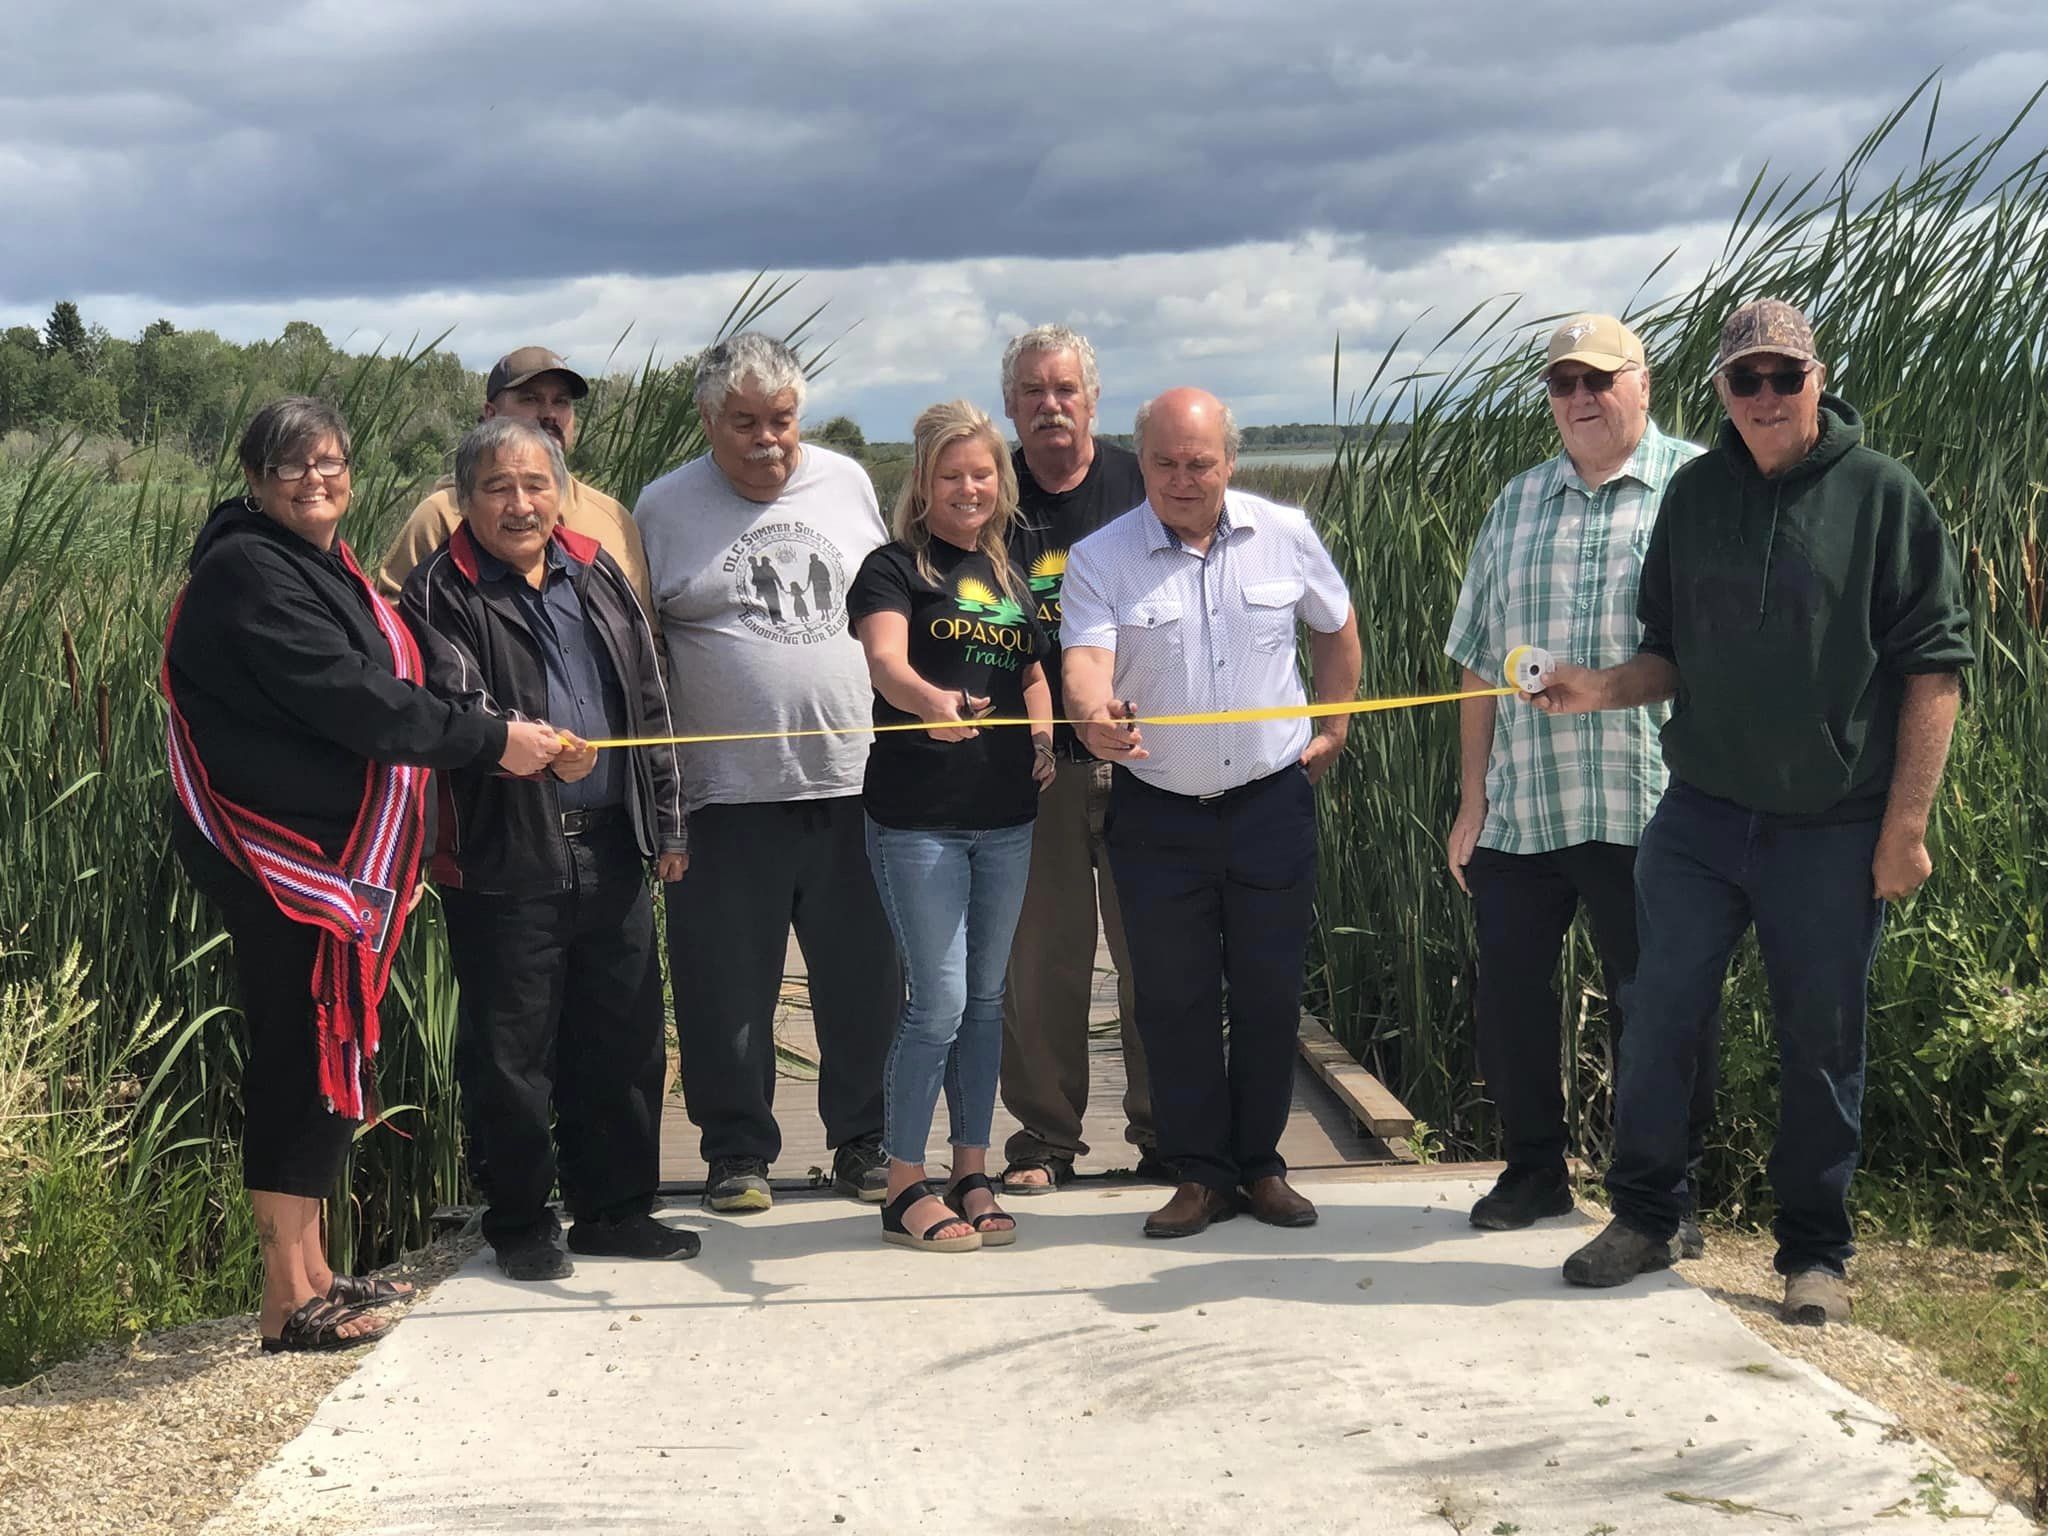 Grace Lake boardwalk grand opening with volunteer team cutting the ribbon